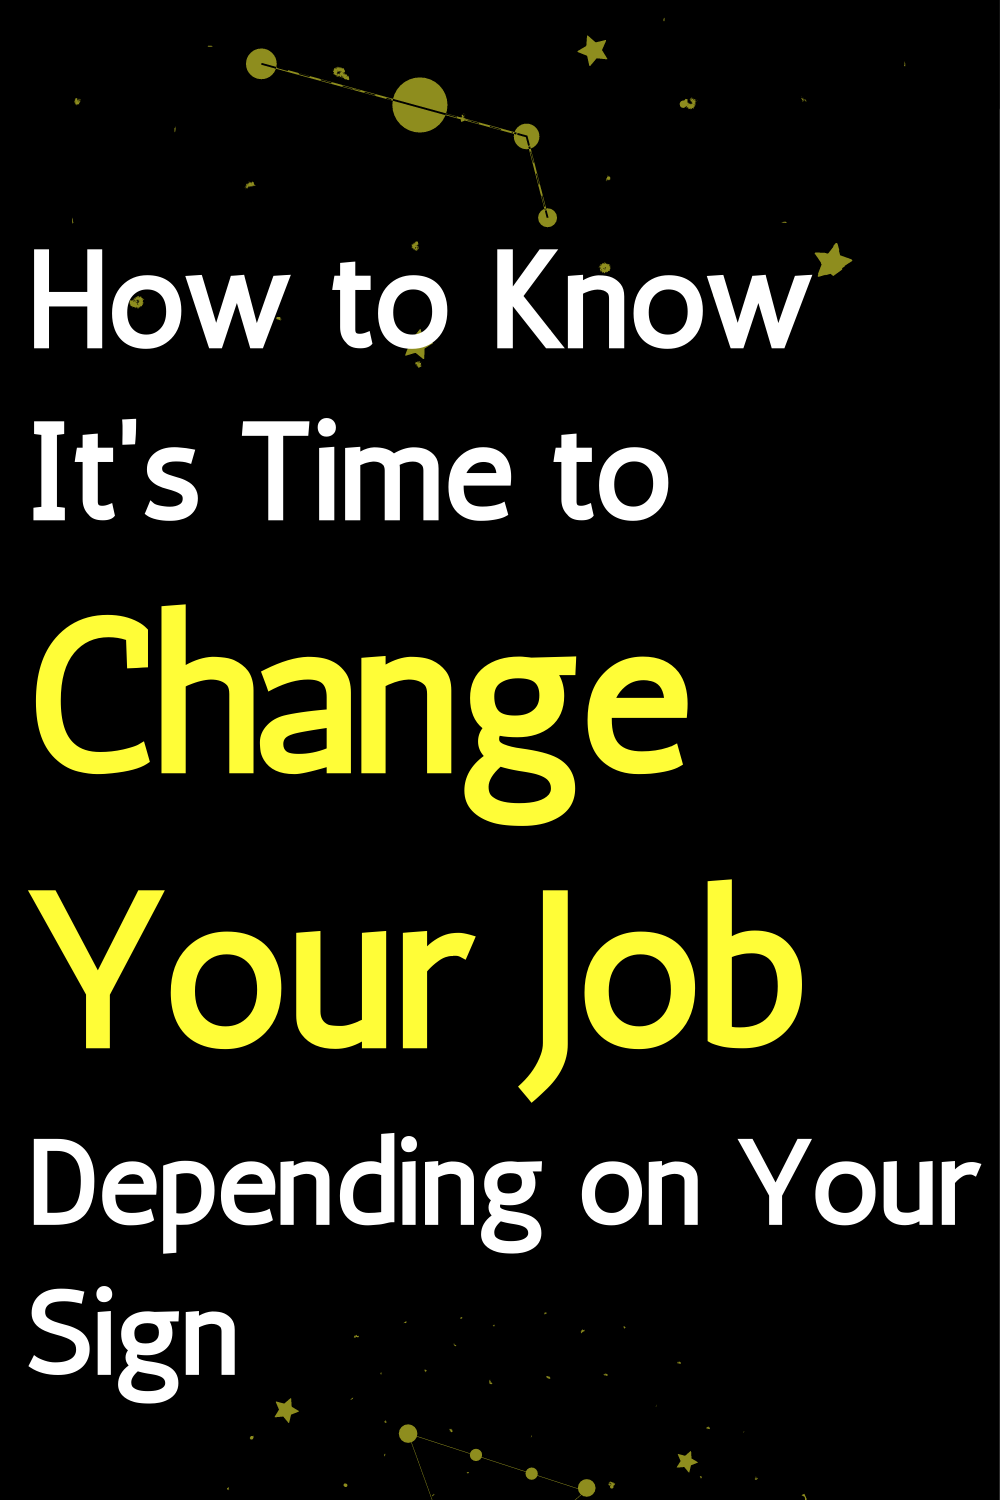 How to Know It's Time to Change Your Job Depending on Your Sign